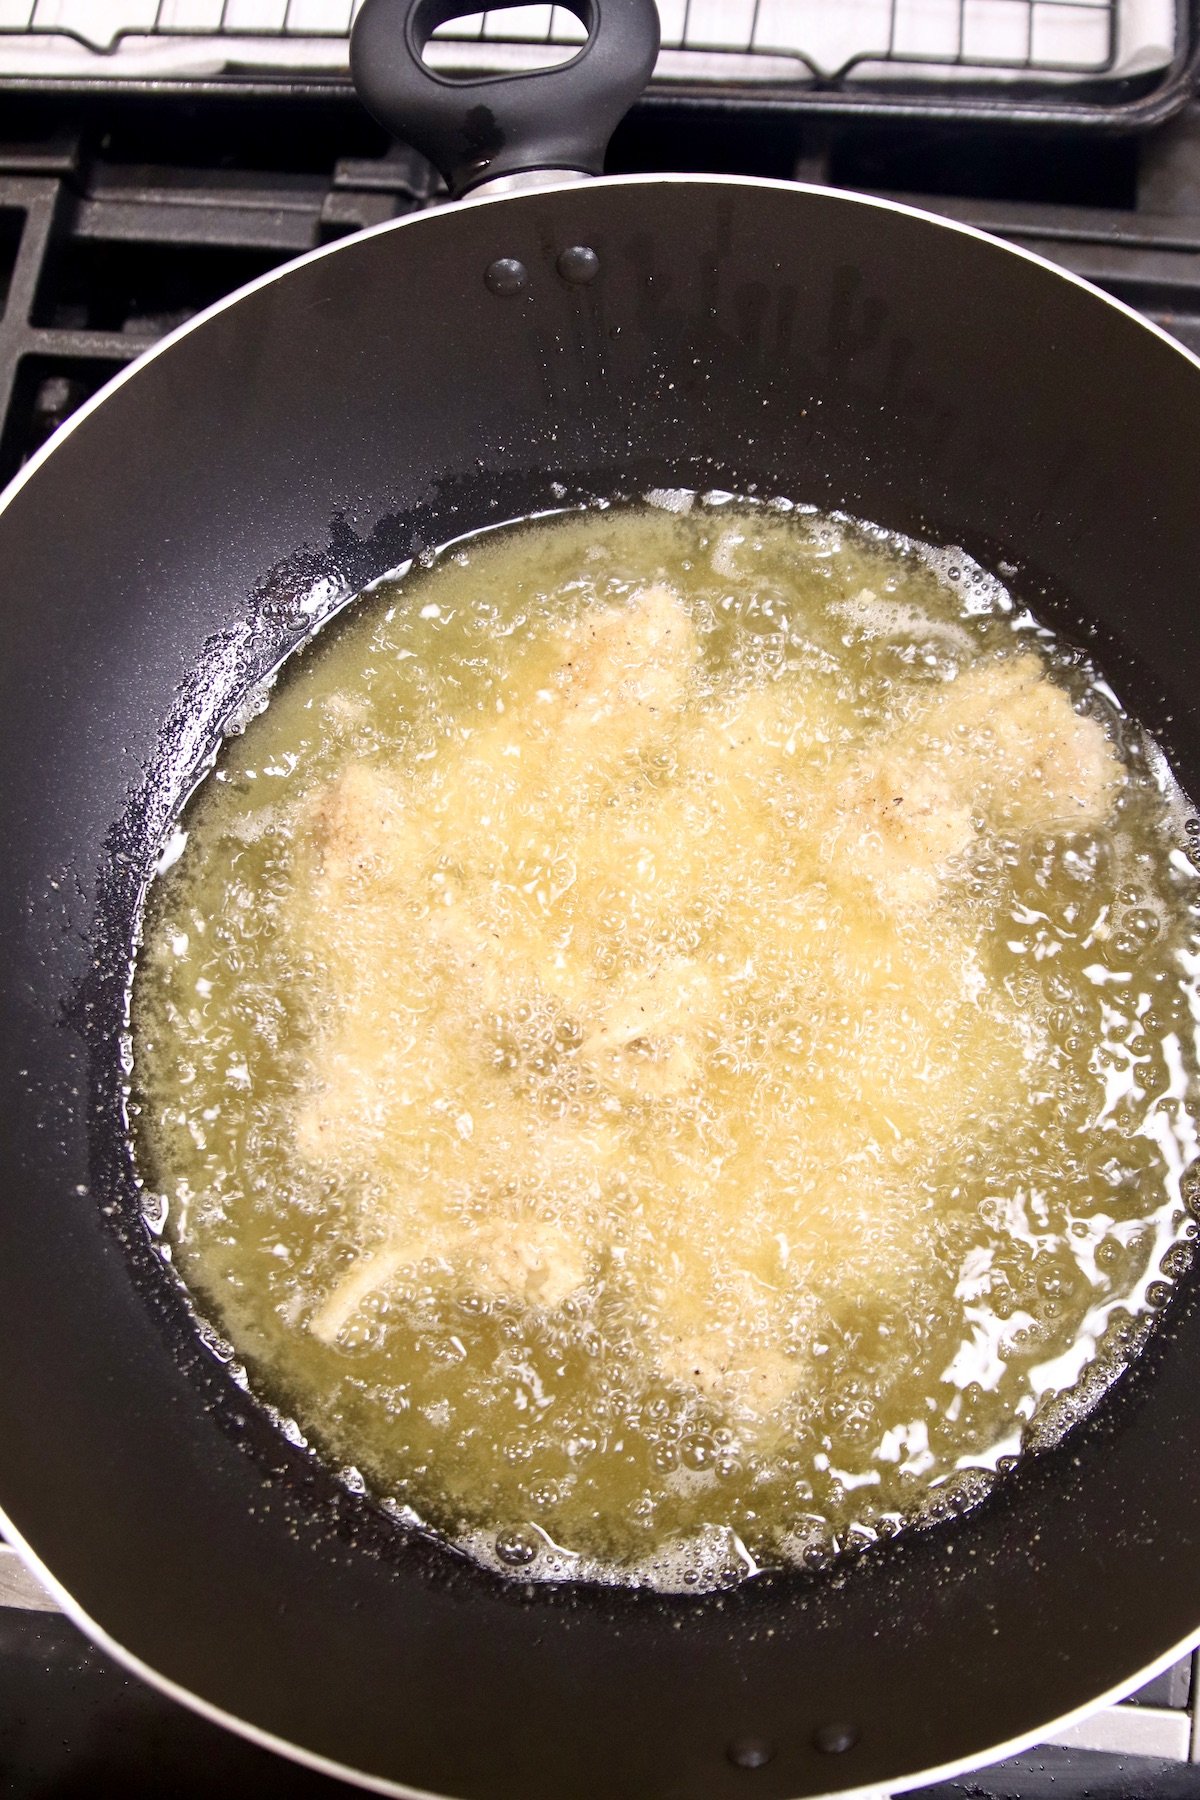 Frying chicken pieces in a wok with vegetable oil